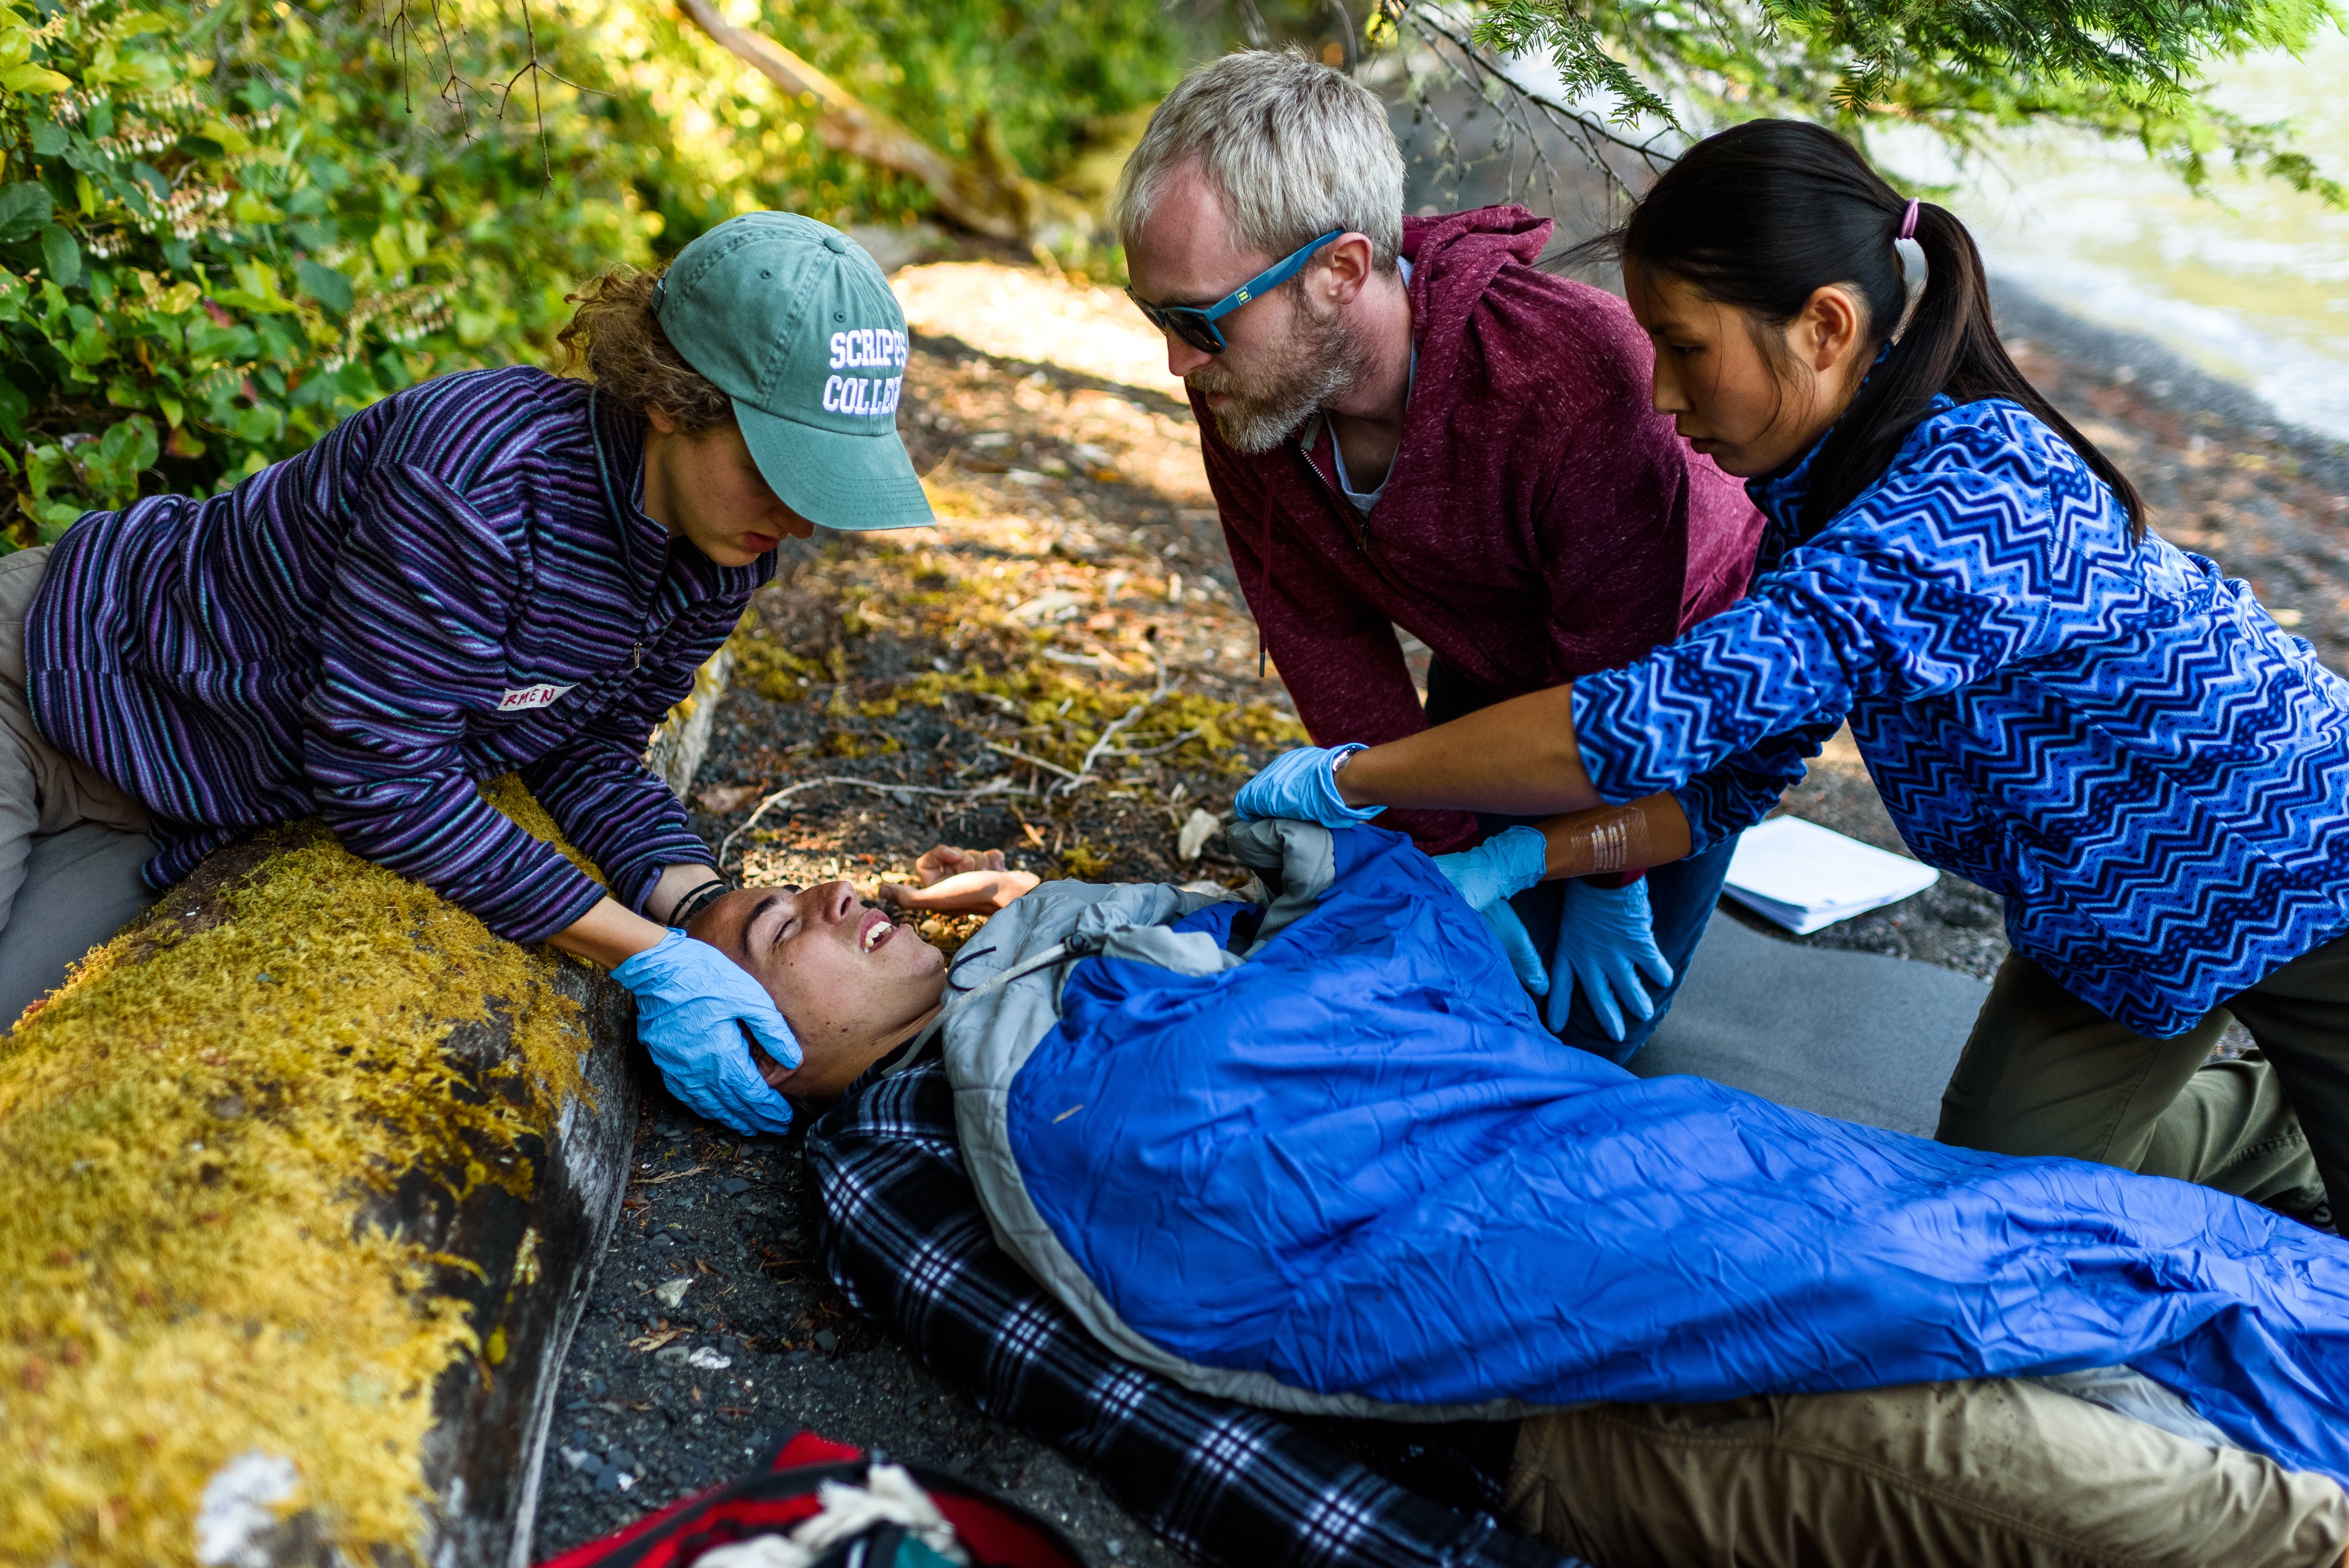 three NOLS students practice caring for a patient in a sleeping bag